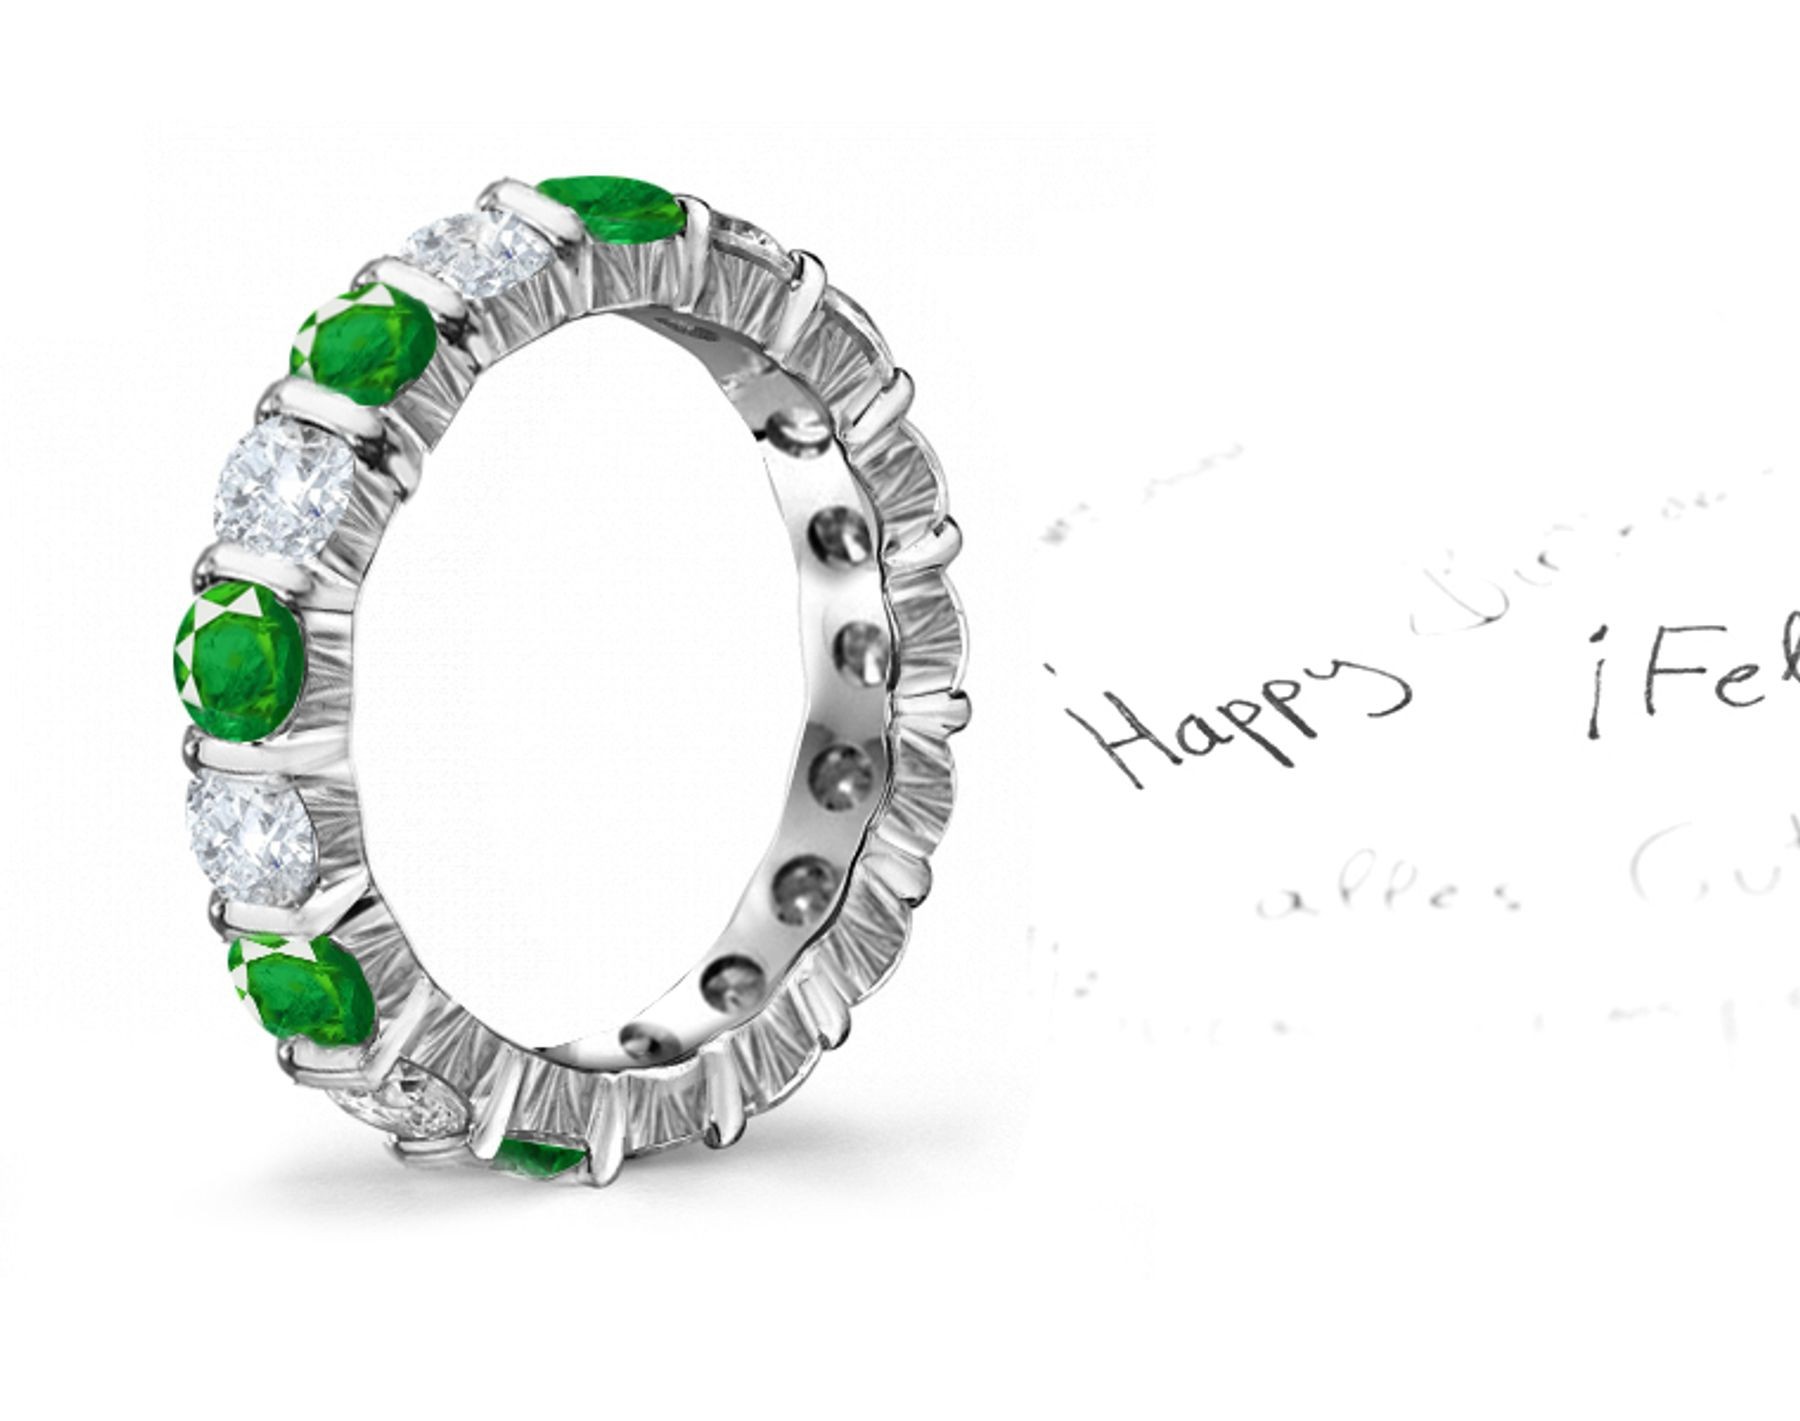 Highly Skilled-Engraving: Hand Engraved Gold Diamond & Emerald Eternity Ring with Dark Shades of Green